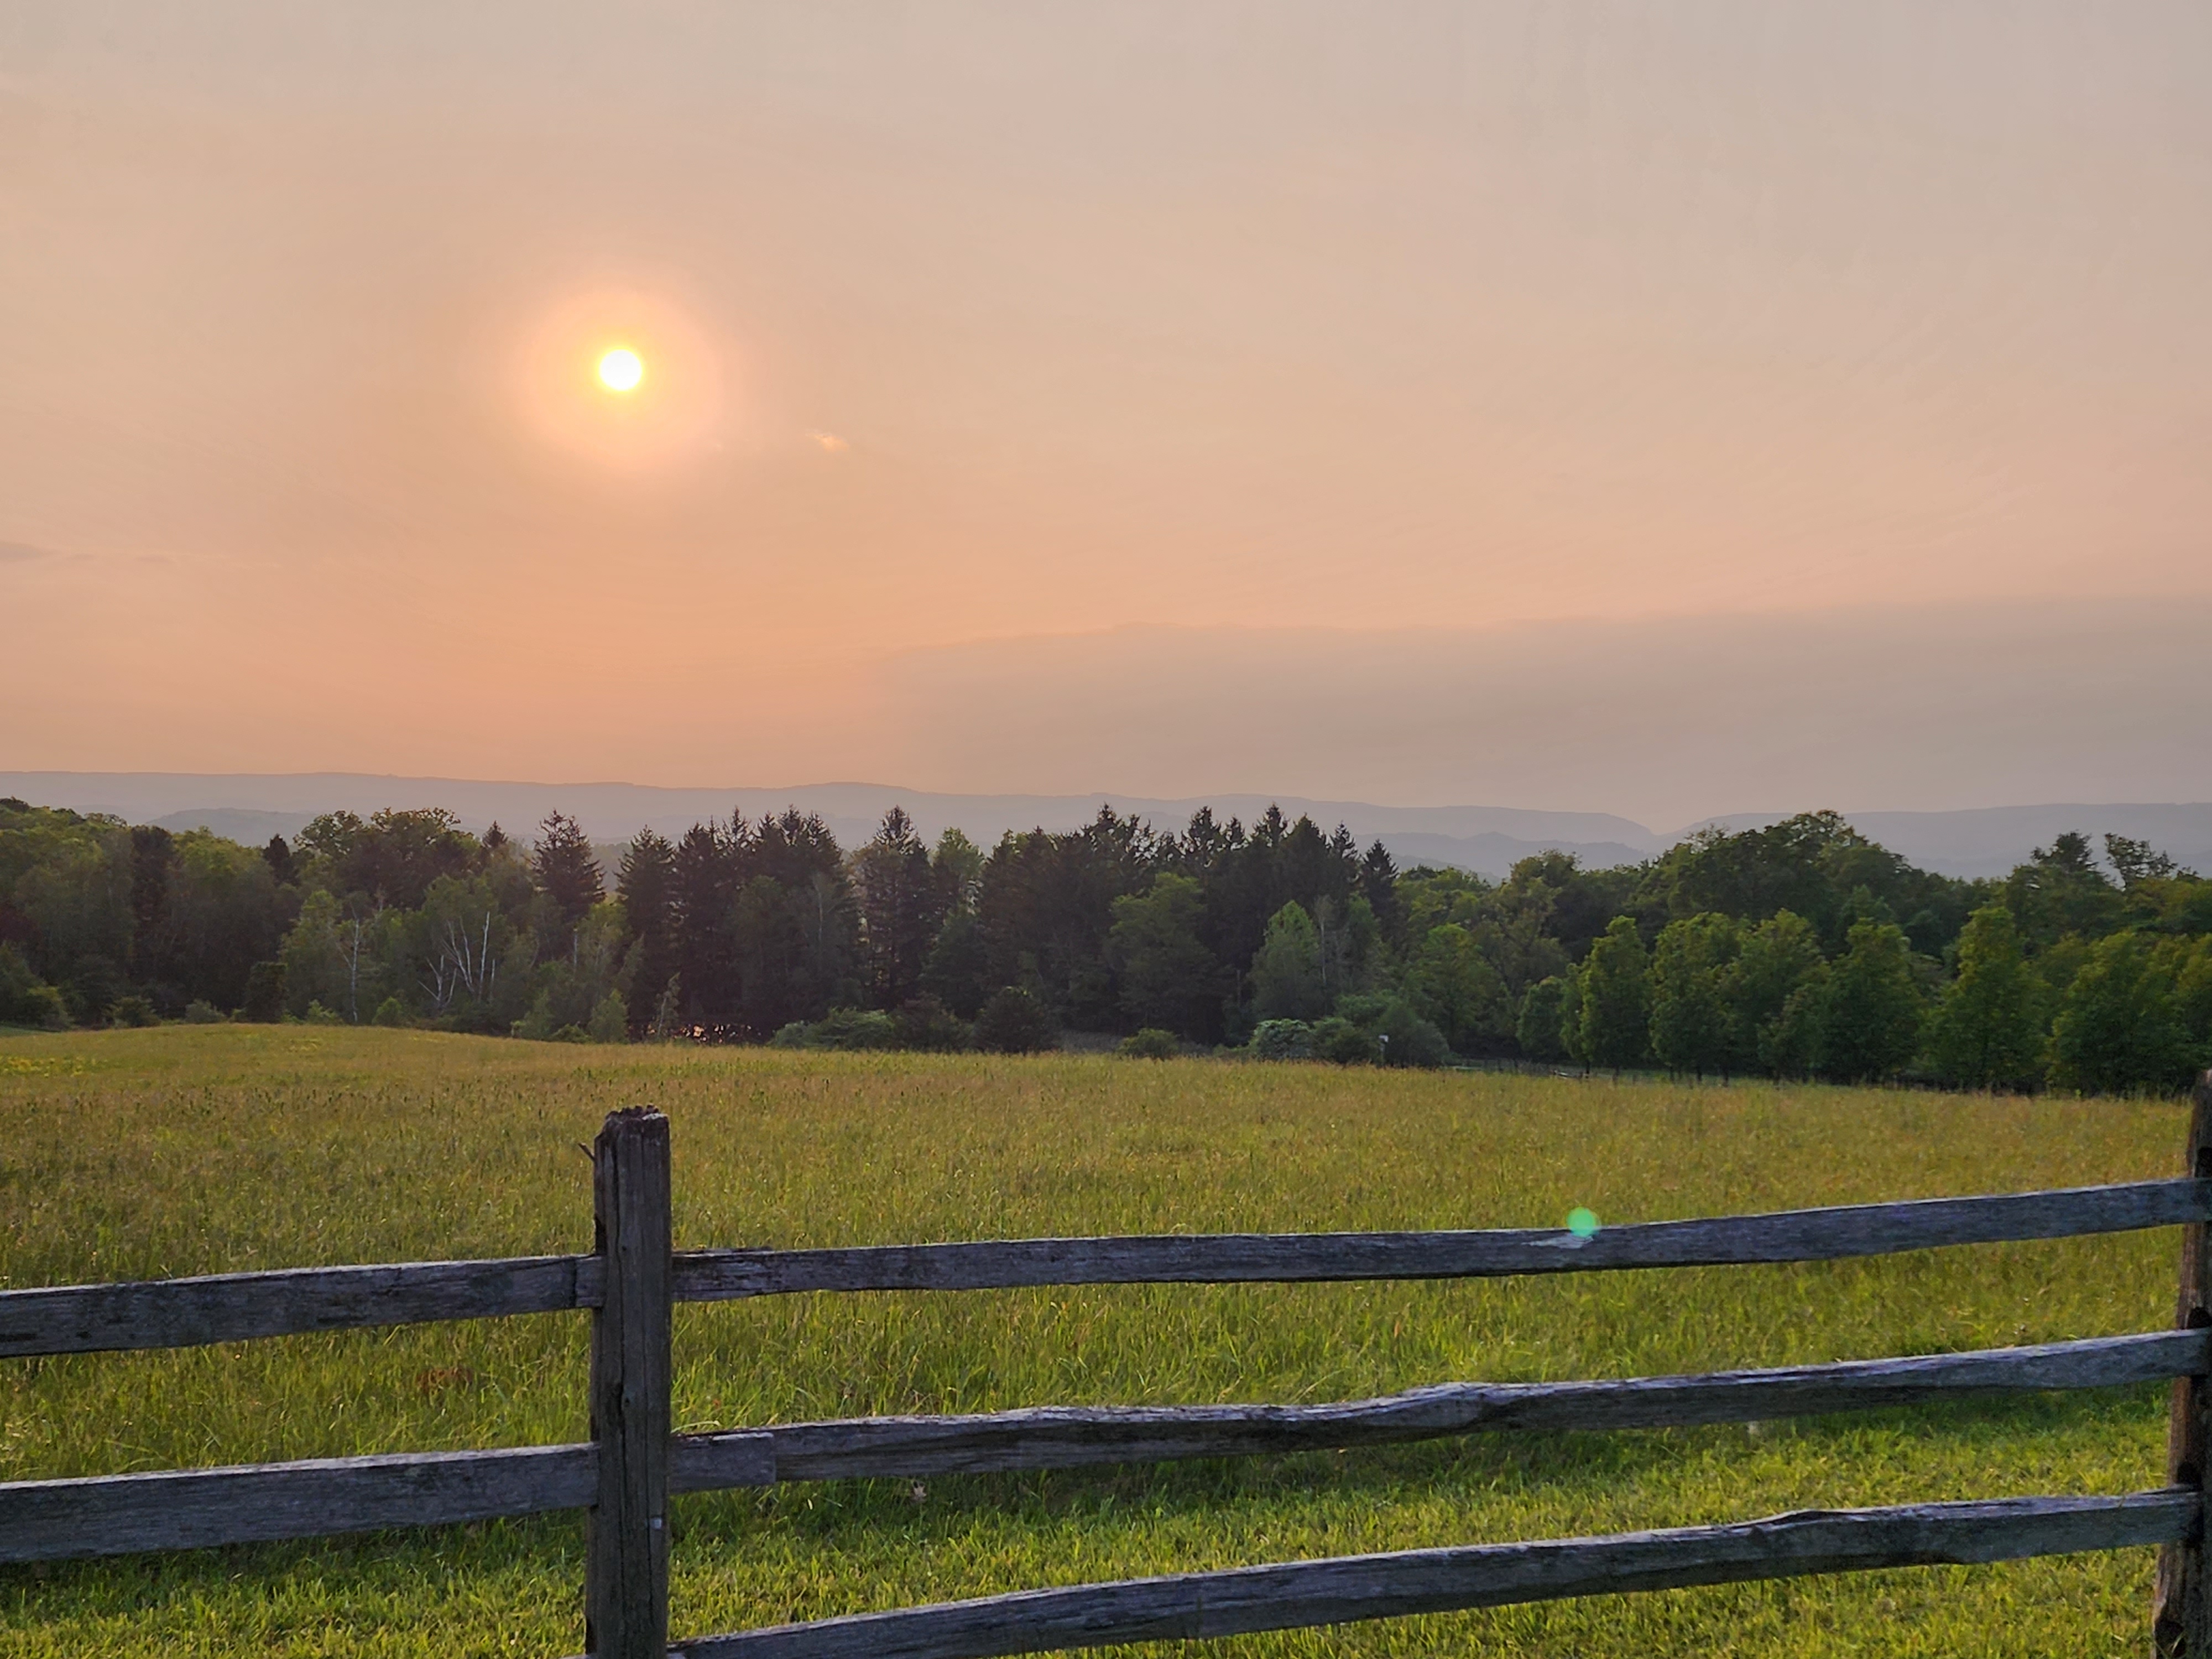 A pinkish orange sunset in the distance among a open field and green trees.